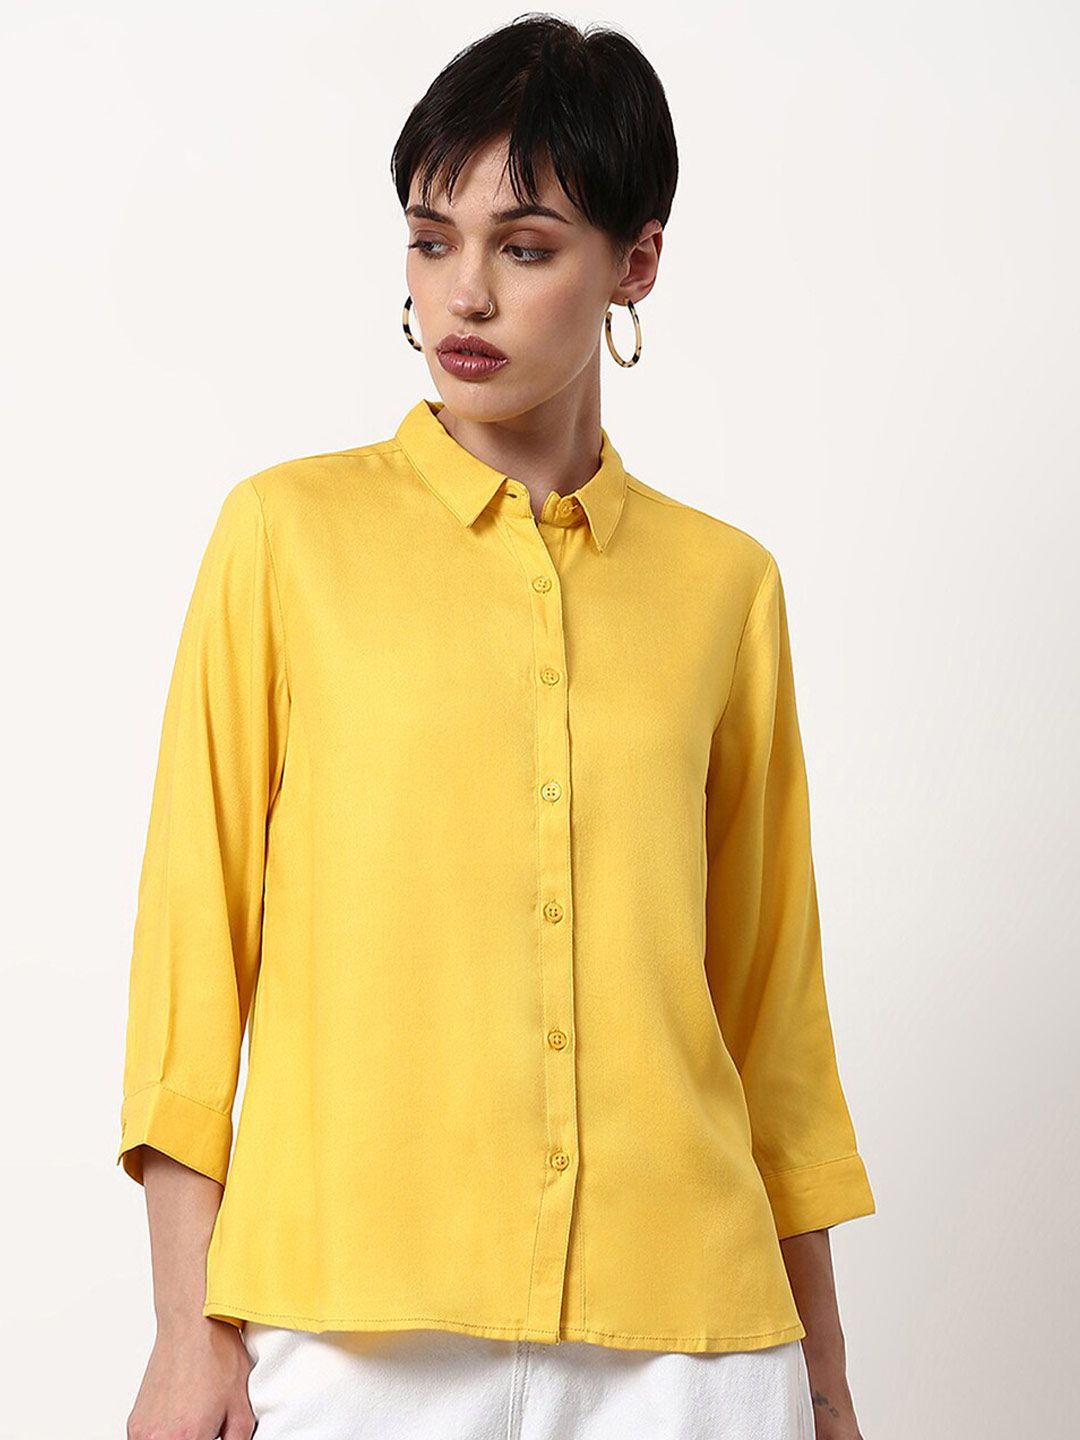 abof Yellow Solid Shirt Style Top Price in India